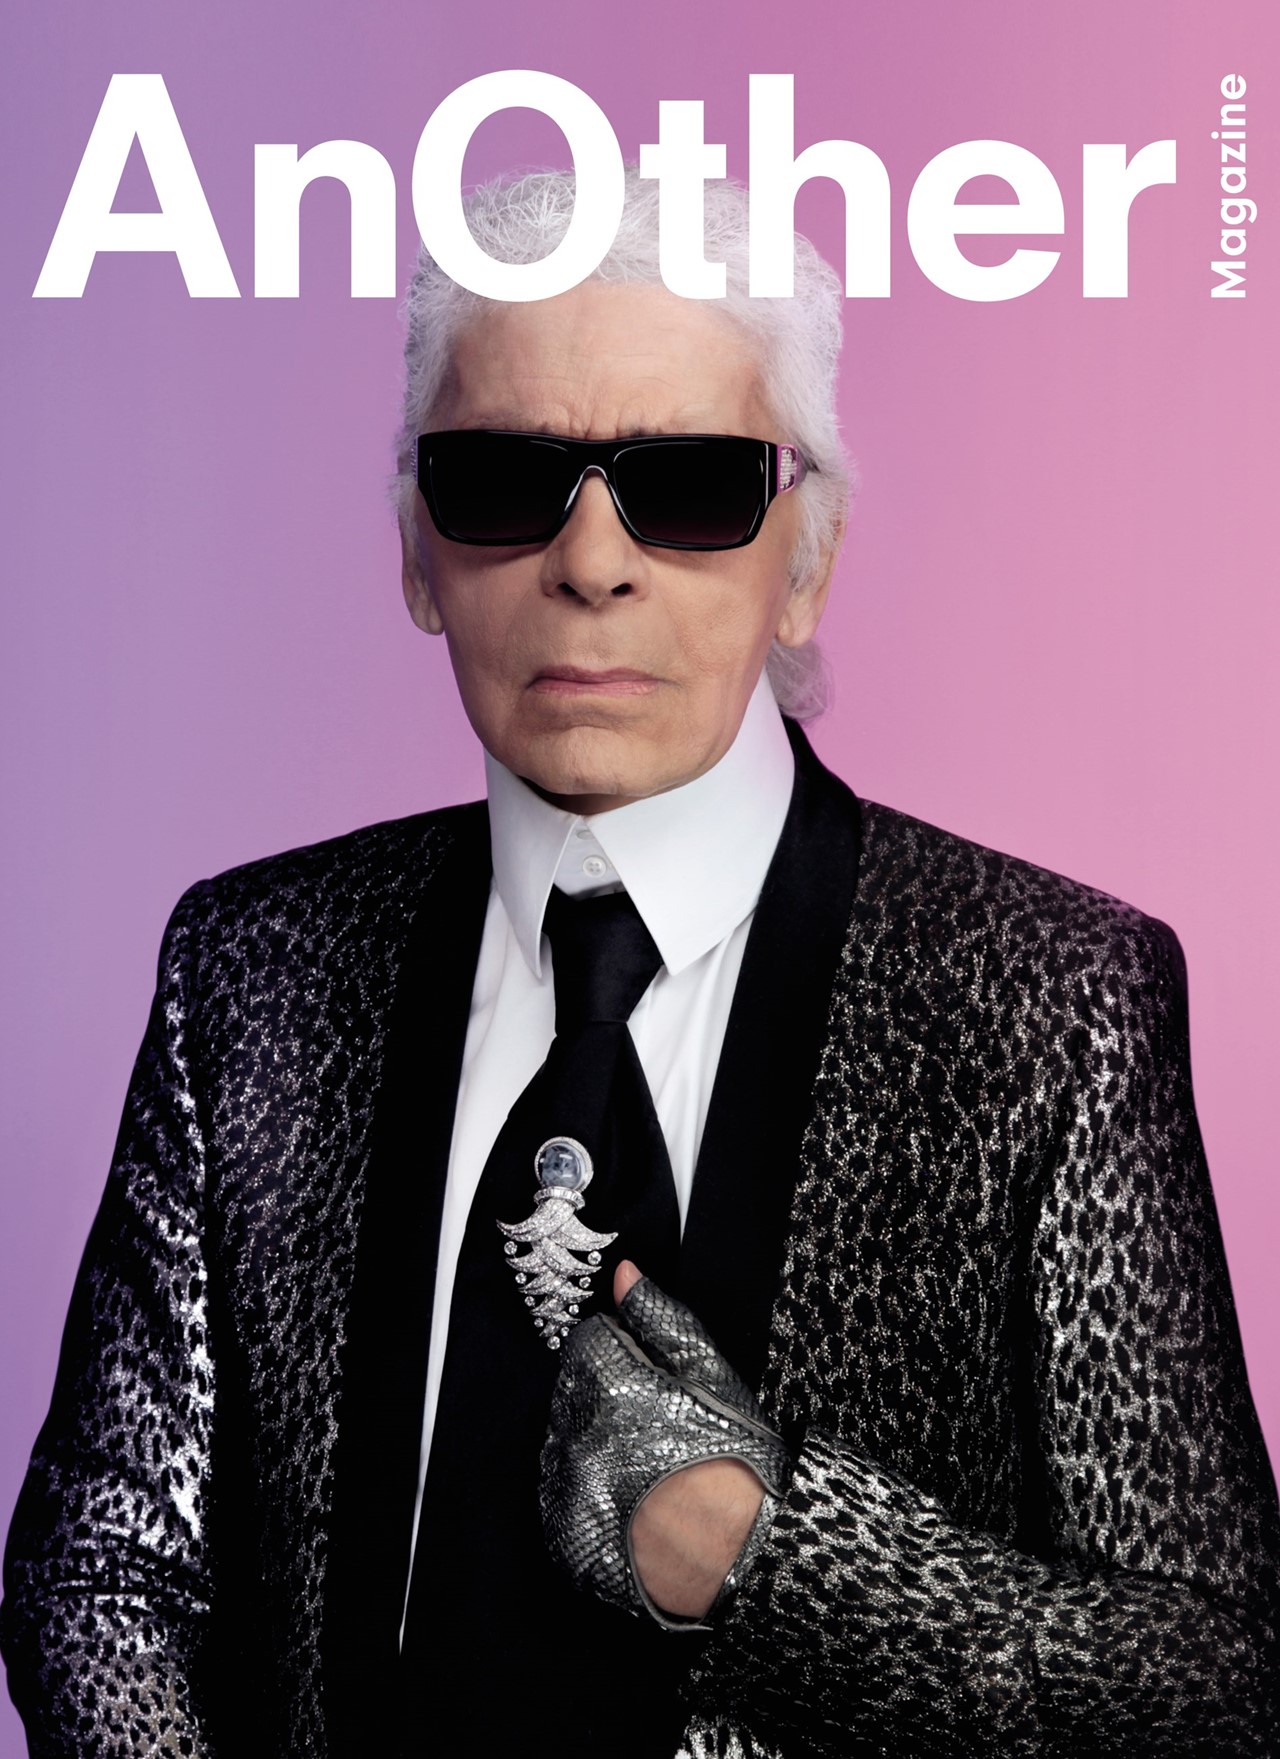 Karl Lagerfeld's Life in Photos